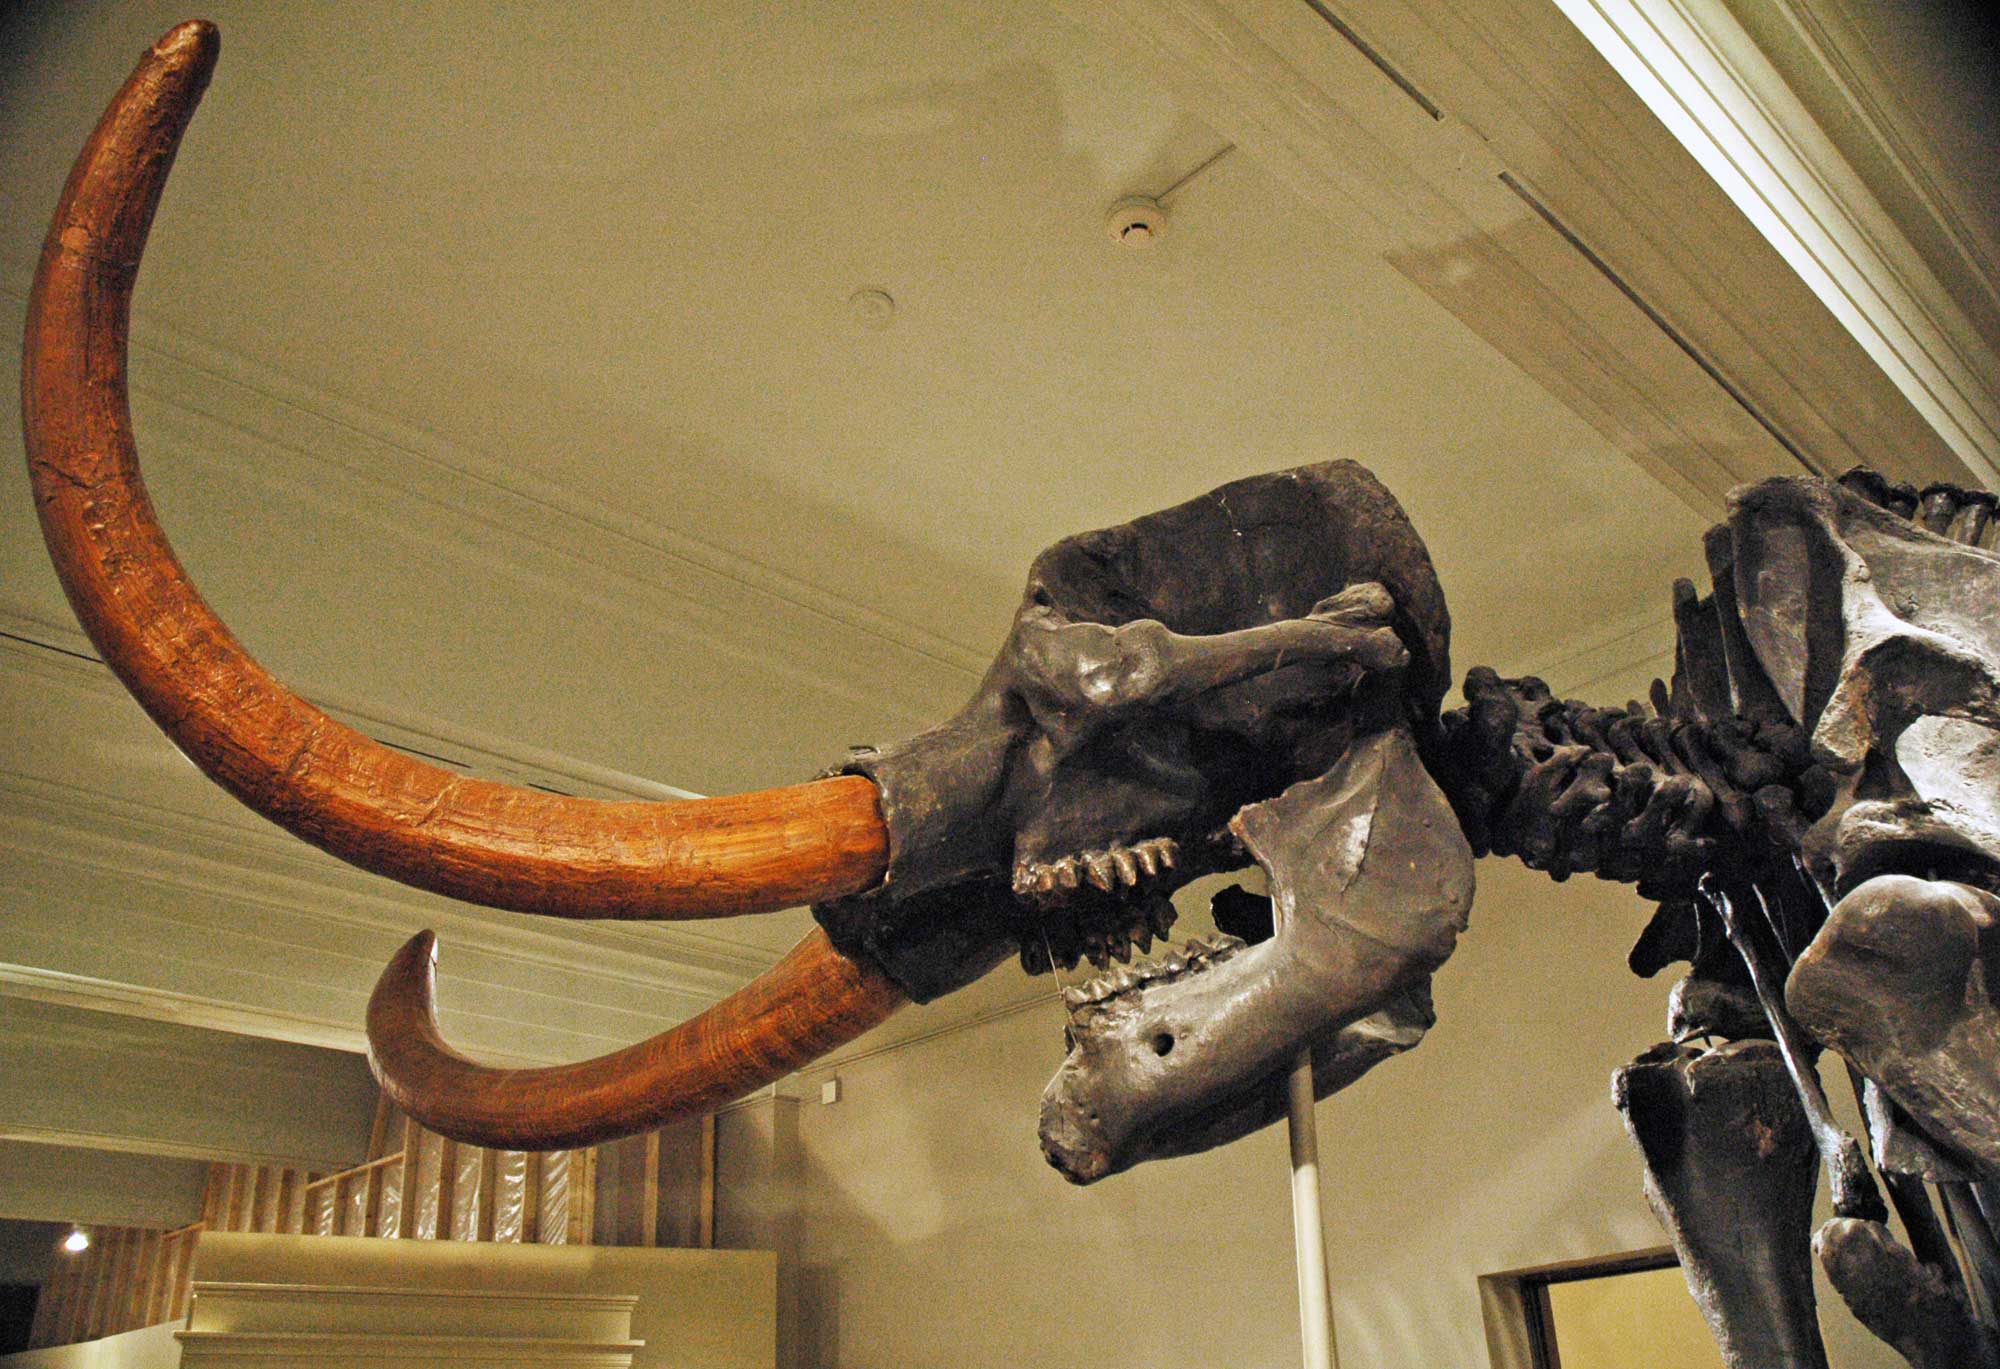 Photograph of an American mastodon from the Pleistocene of Indiana on display in a museum. The photo shows the skull, tusks, neck, and shoulders of a mounted mastodon skeleton. The bones are dark brown and the tusks are light brown. The characteristic teeth with pointed cusps can be seen in the open mouth.